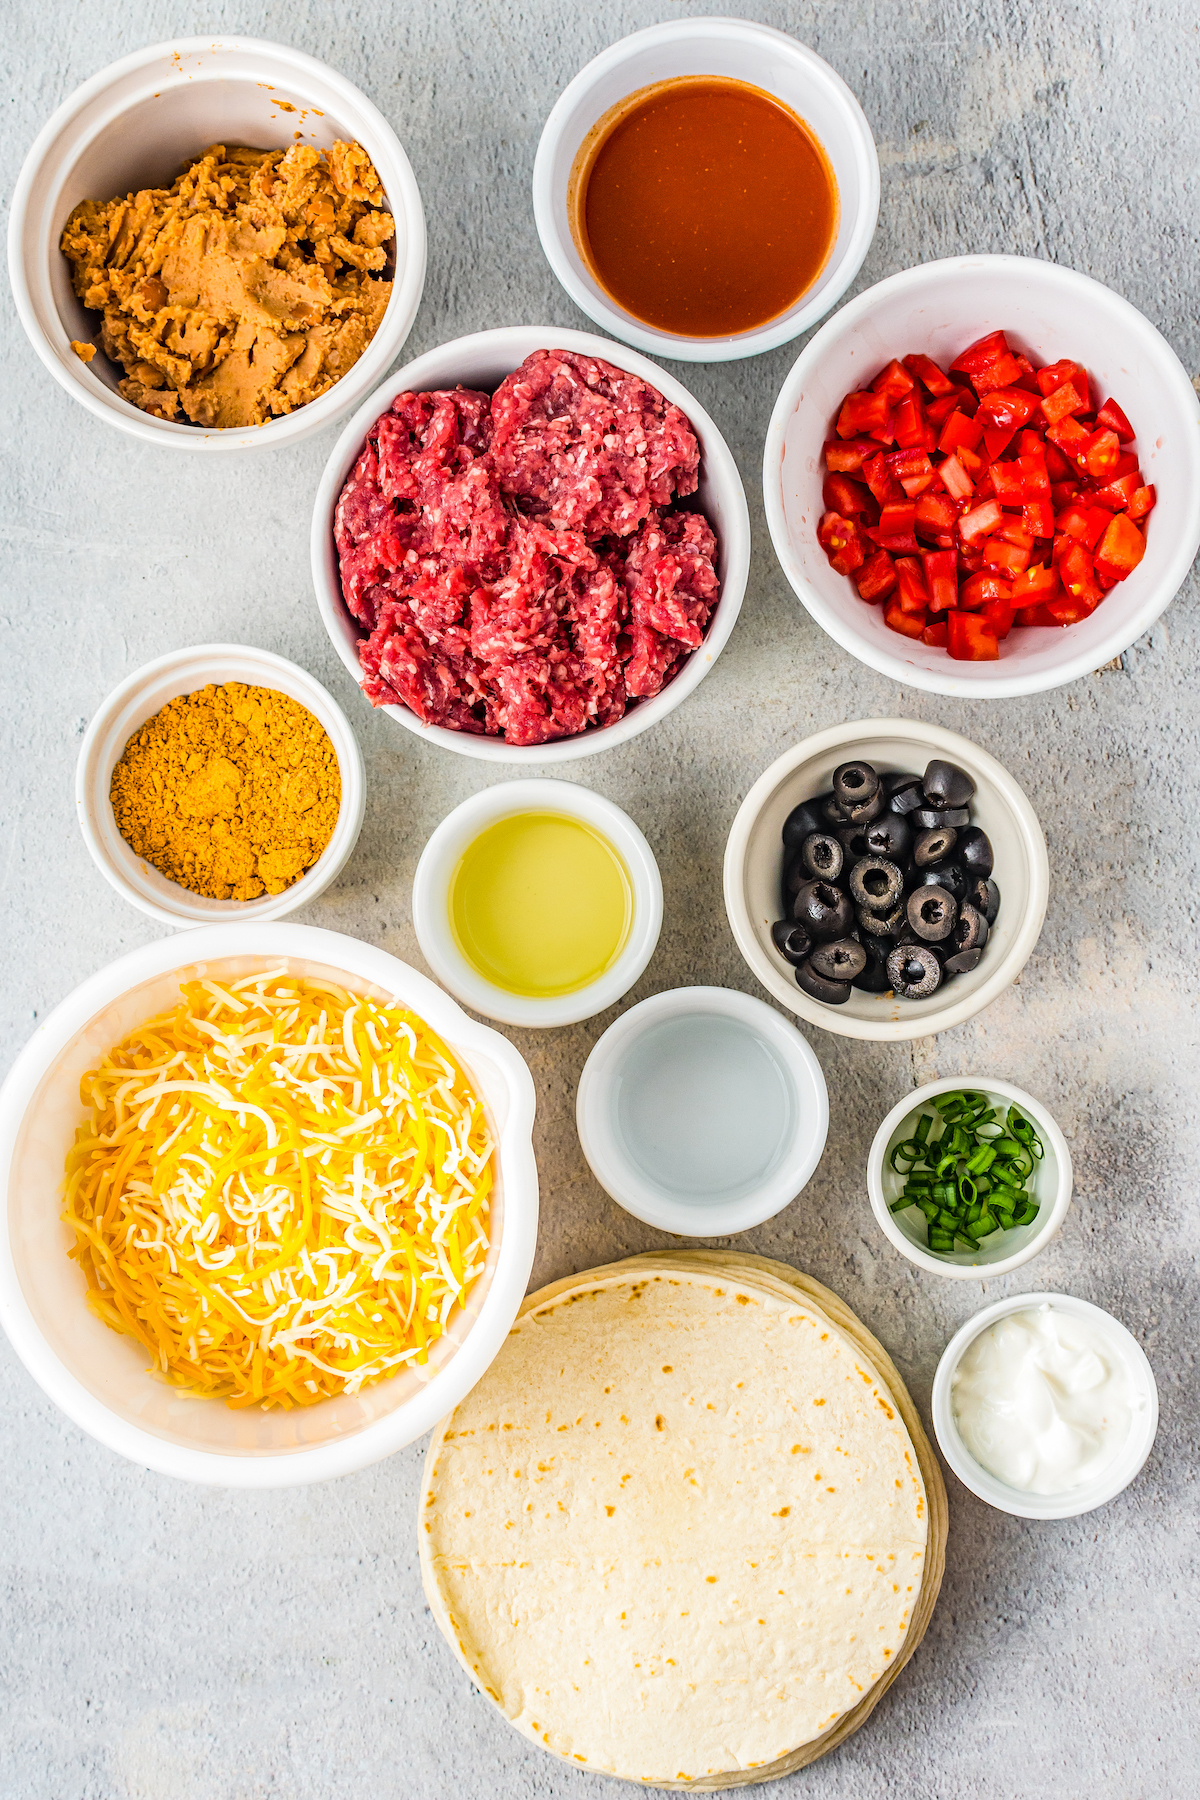 The ingredients for homemade Mexican pizzas, measured and arranged on a cutting board.